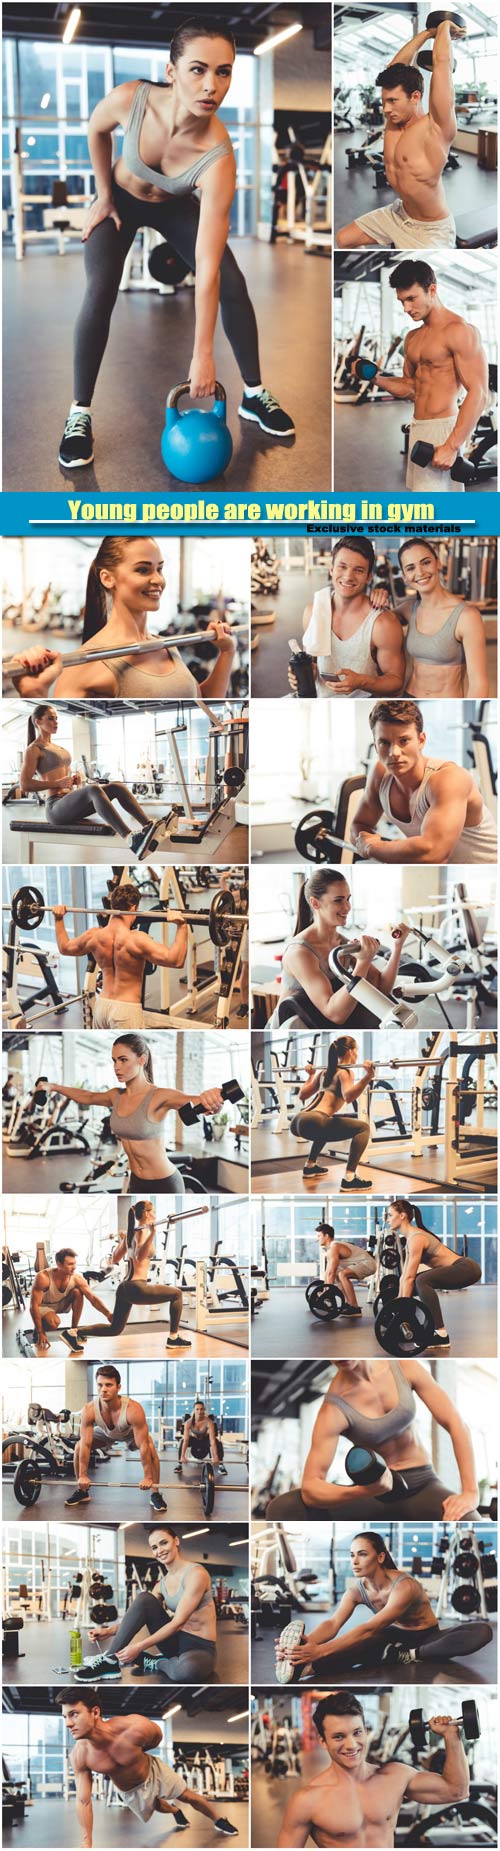 Attractive young people are working in gym